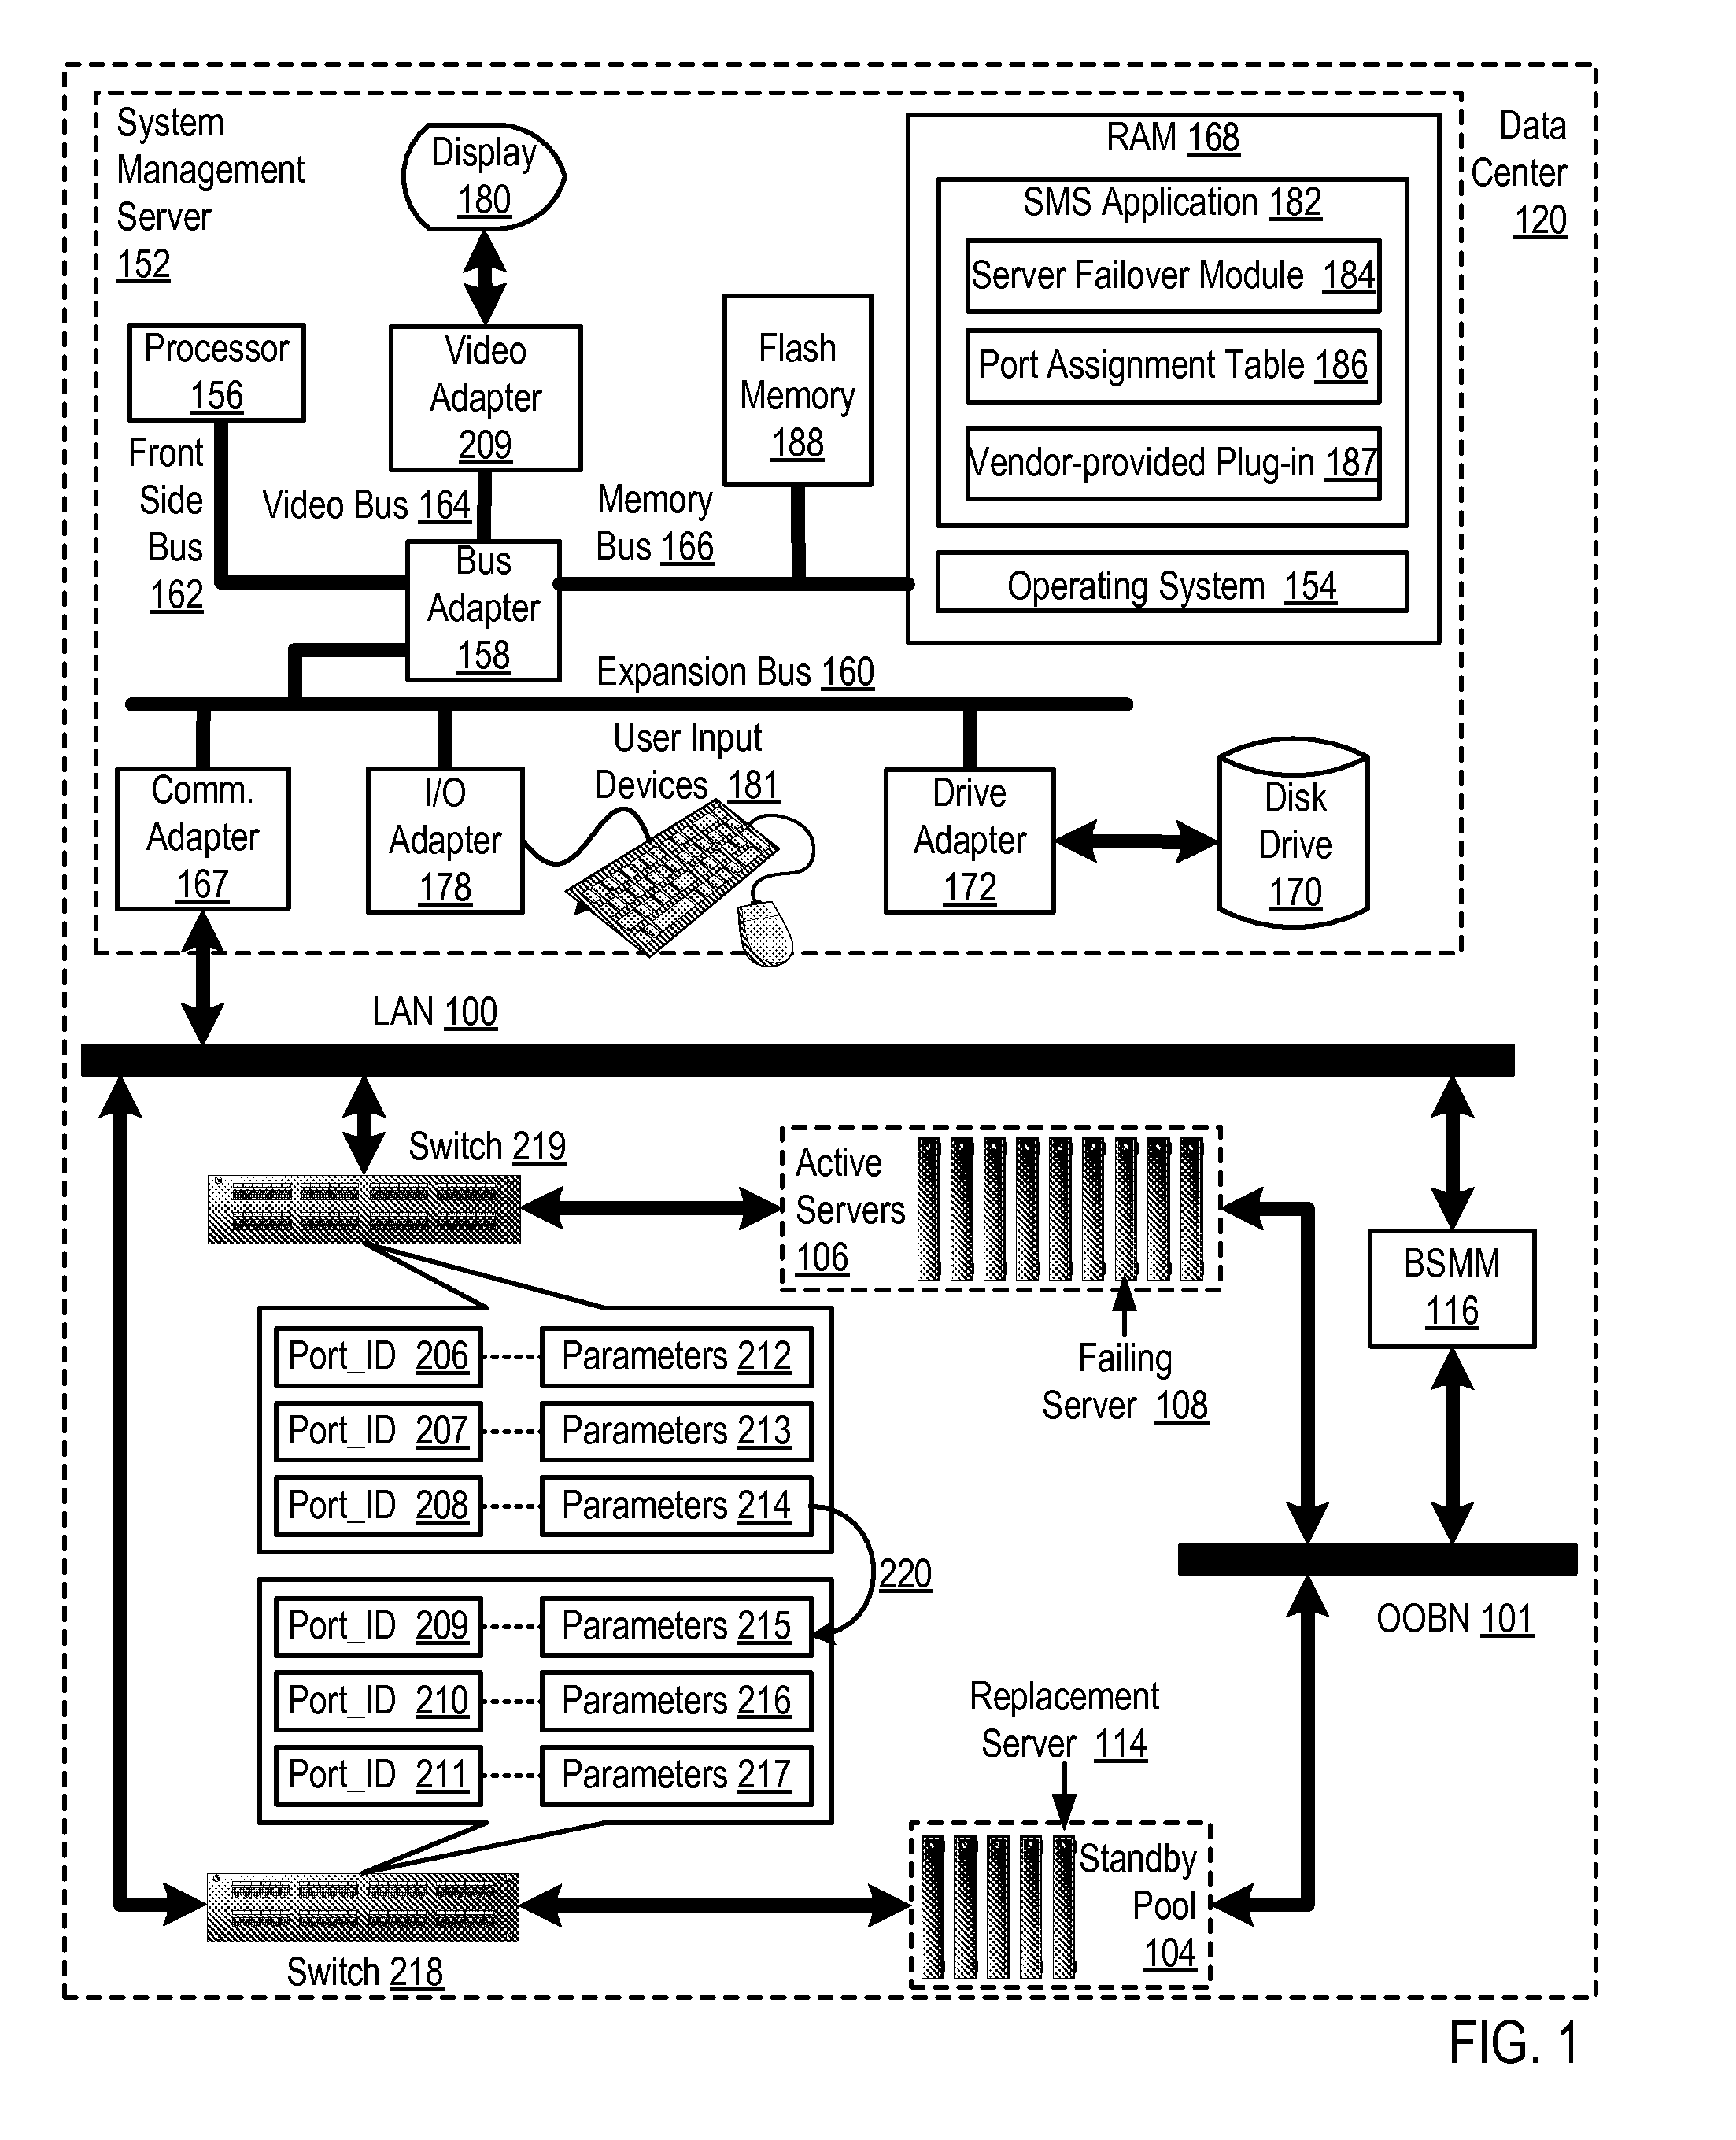 Migrating port-specific operating parameters during blade server failover